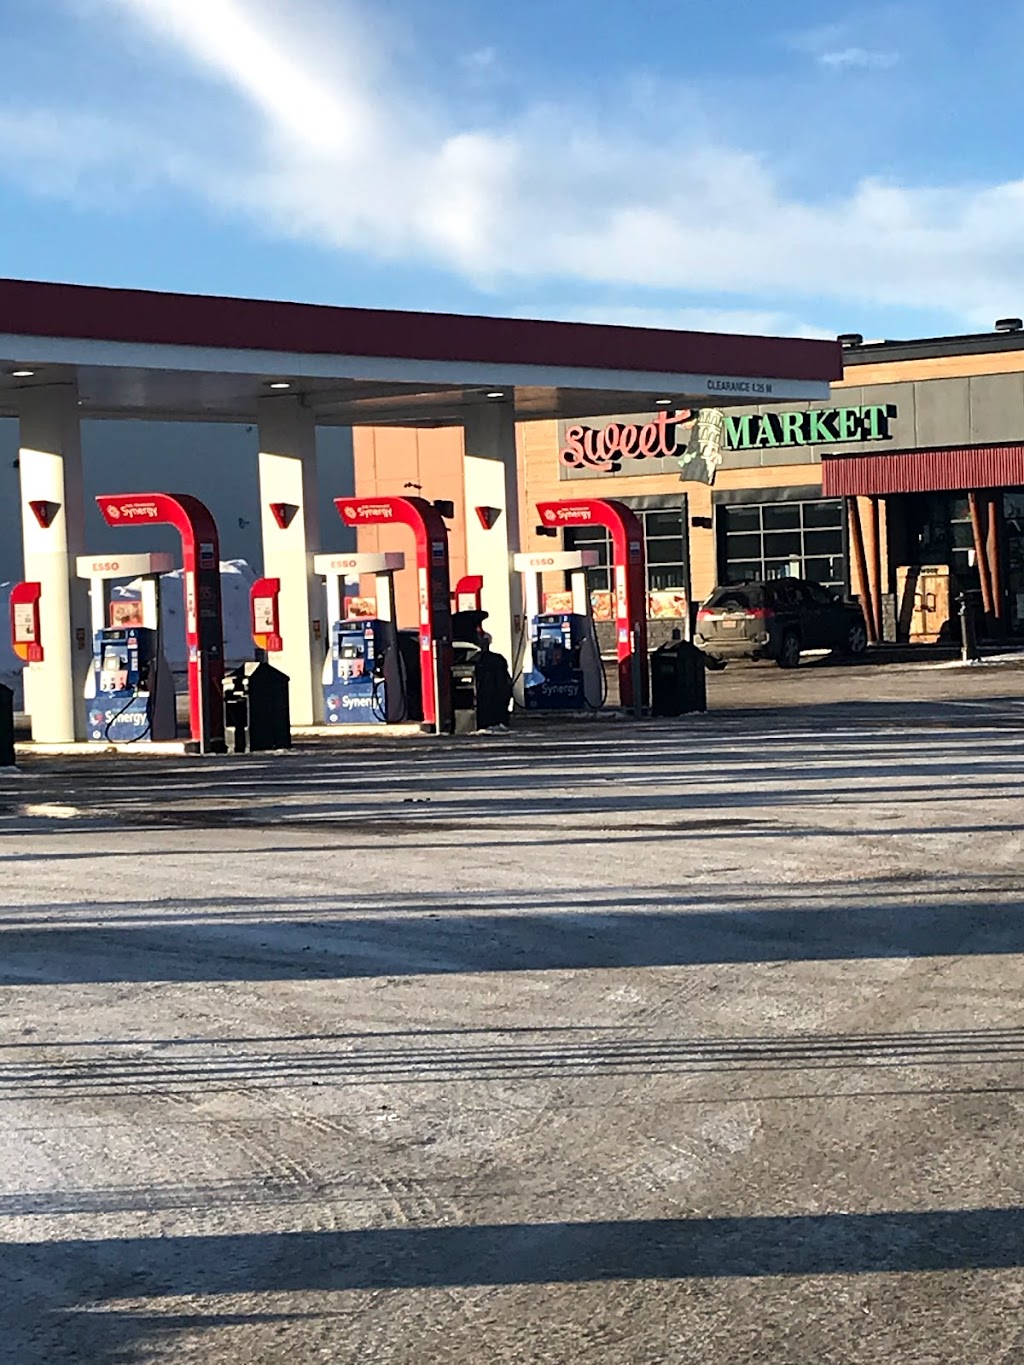 Sweet Market Esso | convenience store | 172 Leva Ave #101, Red Deer, AB T4E 1B9, Canada | 4033436393 OR +1 403-343-6393